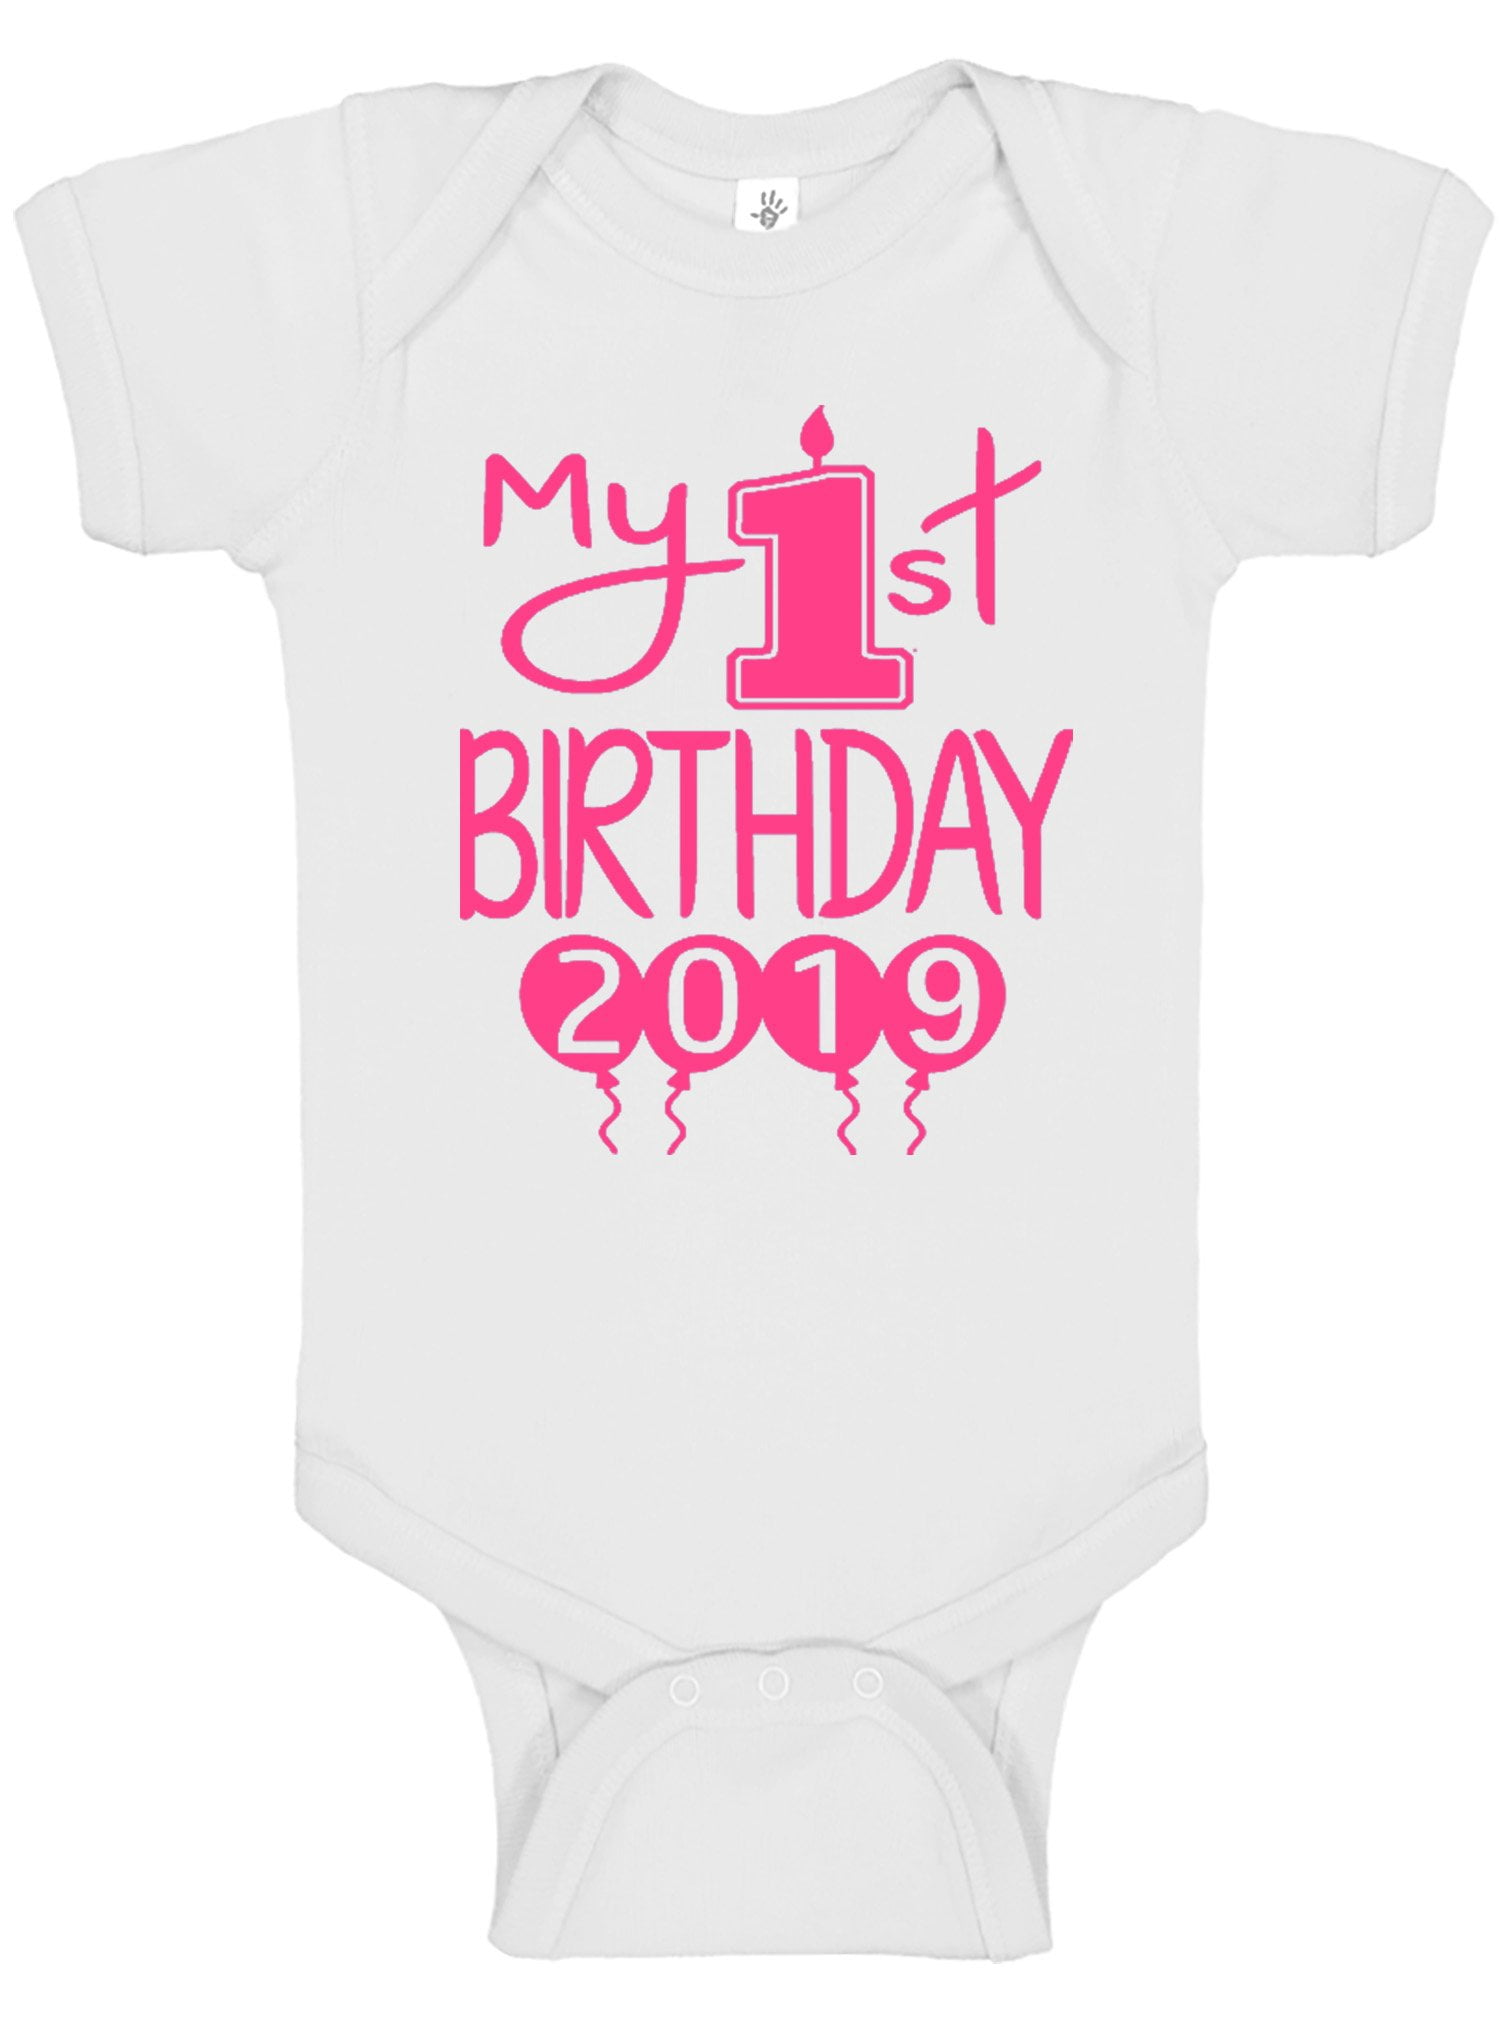 minnie mouse 1st birthday outfit walmart